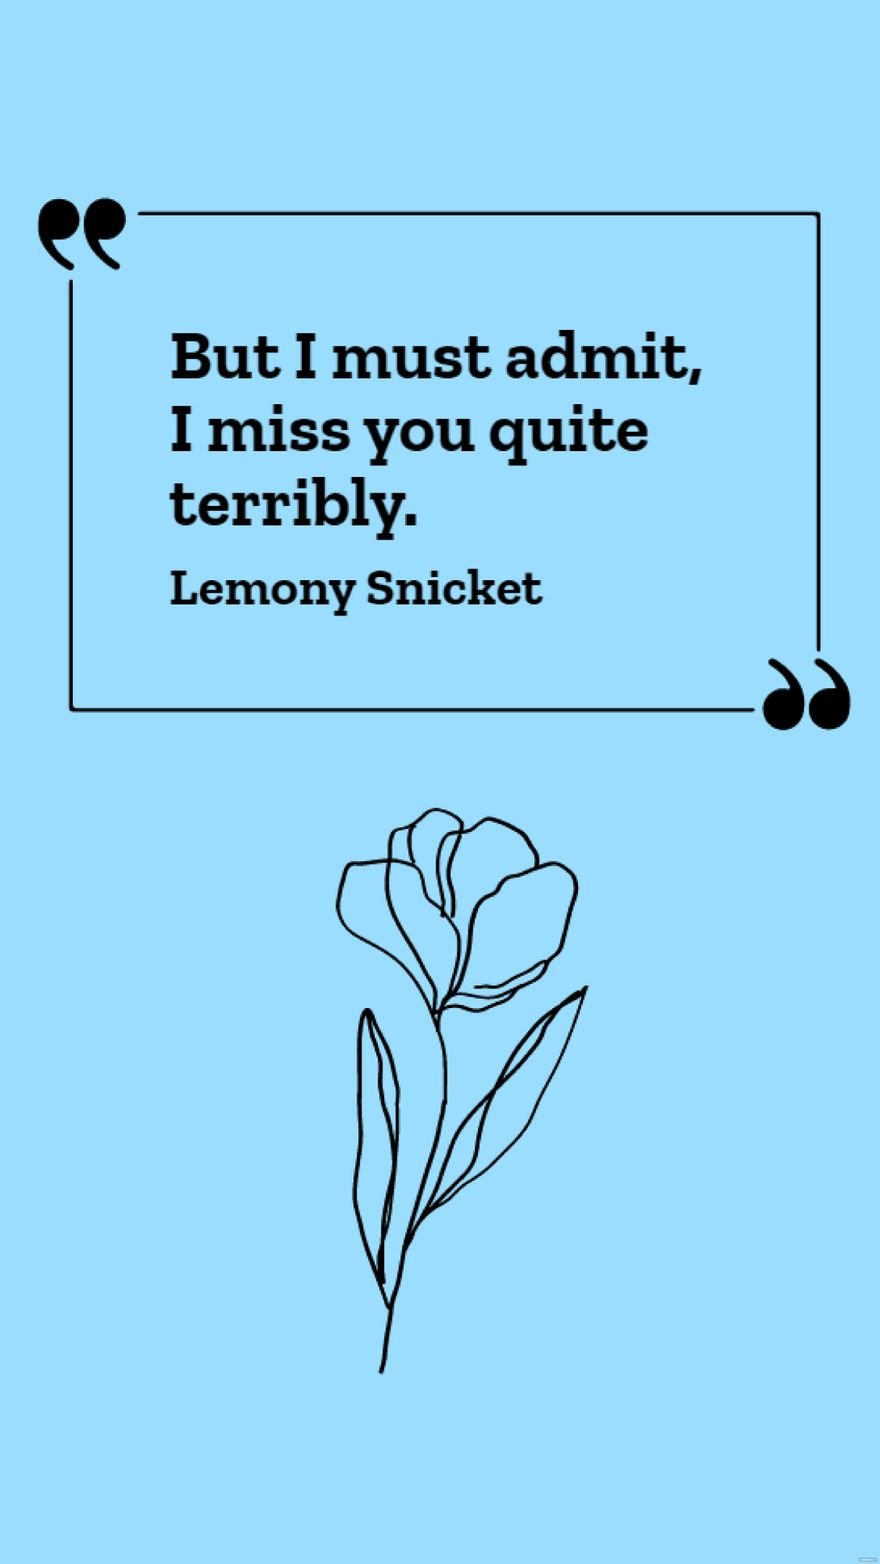 Free Lemony Snicket, The Beatrice Letters - But I must admit, I miss you quite terribly. in JPG